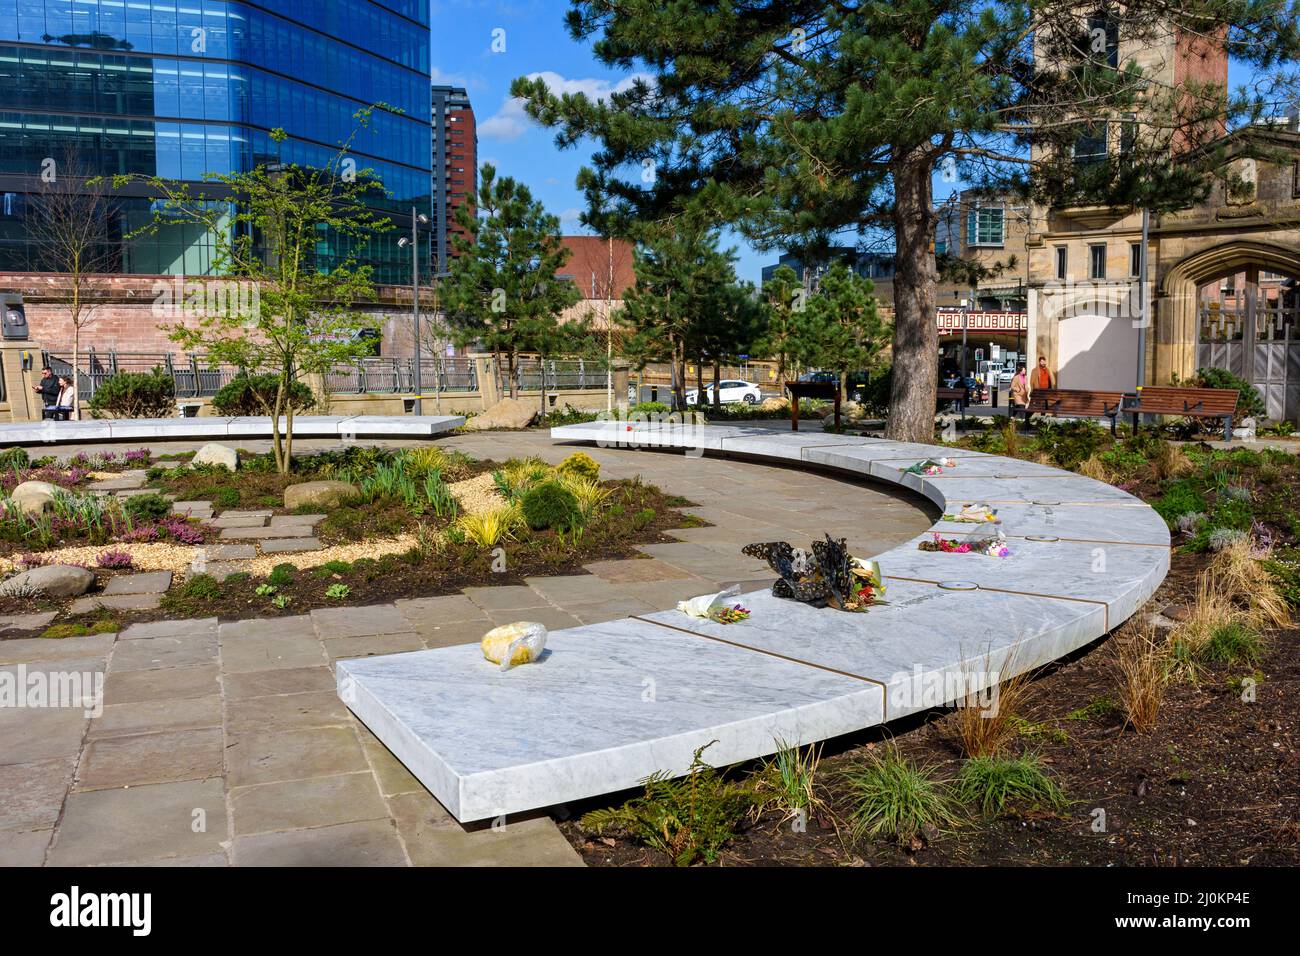 The Glade of Light Memorial Garden, Manchester, England, UK.  Commemorates the 22 victims of the Manchester Arena terrorist bombing of May 2017. Stock Photo